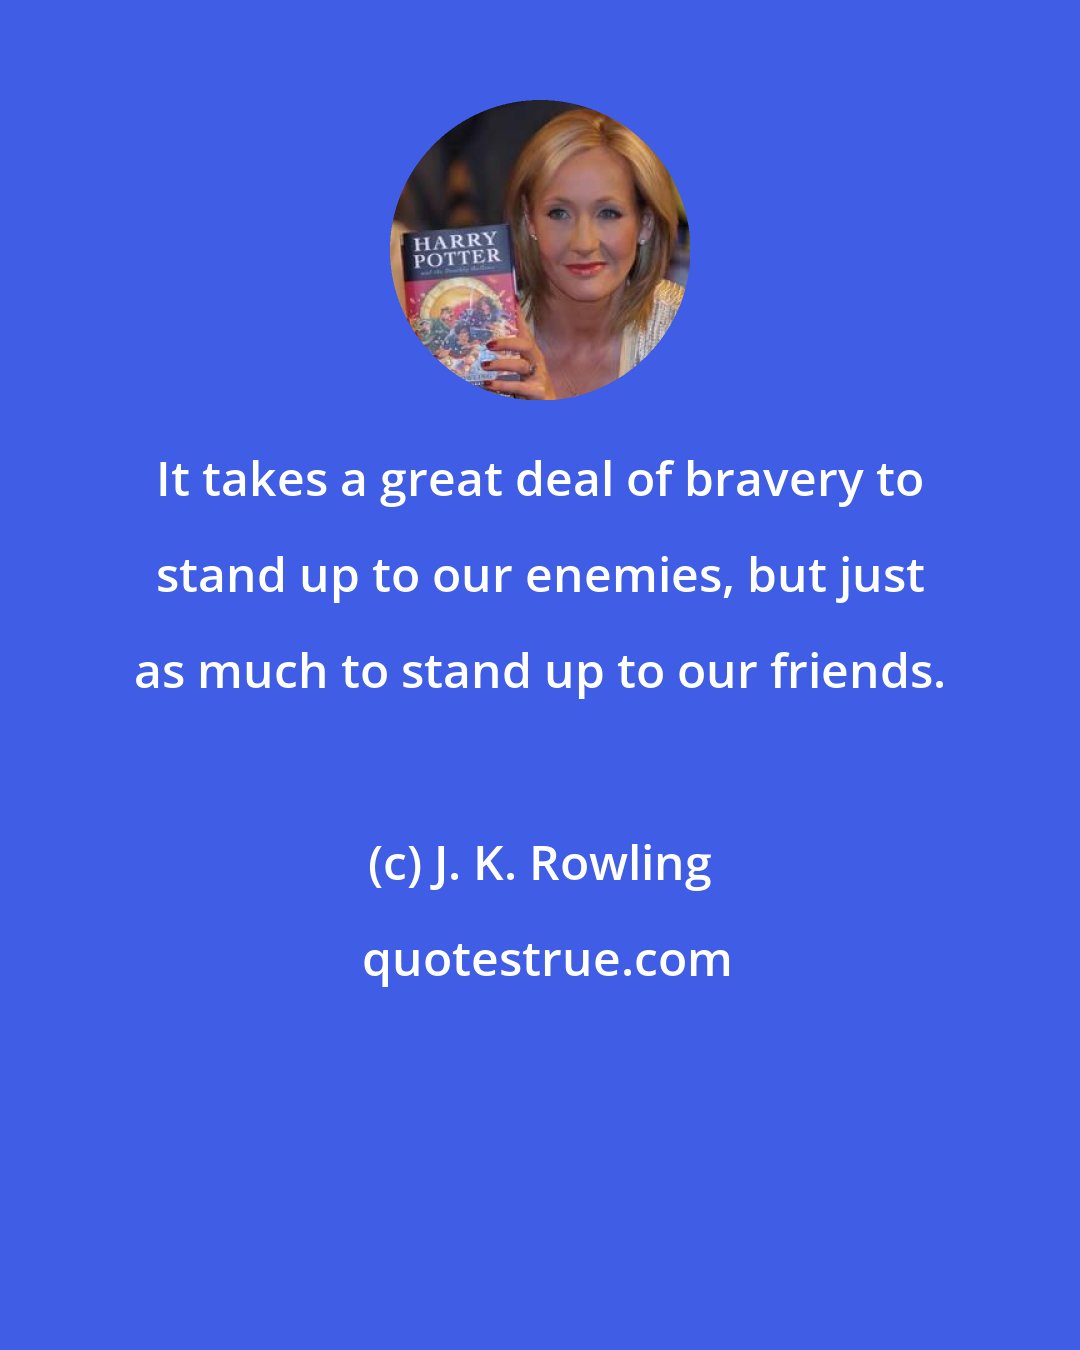 J. K. Rowling: It takes a great deal of bravery to stand up to our enemies, but just as much to stand up to our friends.